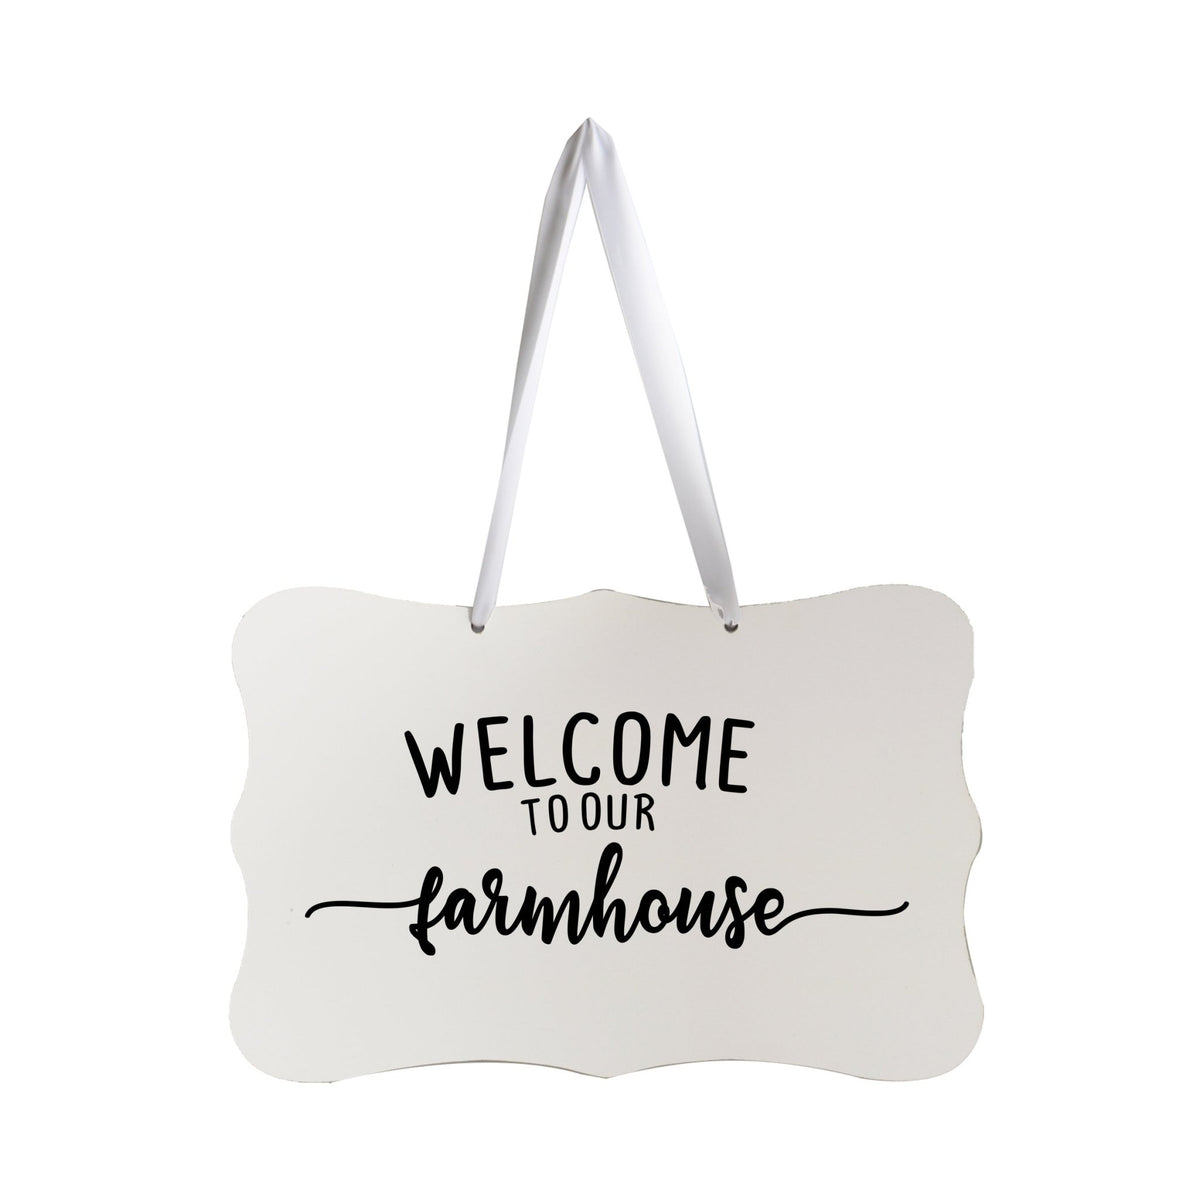 Modern Inspirational Wooden Wall Hanging Sign for Home Decorations 8x12 - Welcome To Our Farmhouse (Script) - LifeSong Milestones